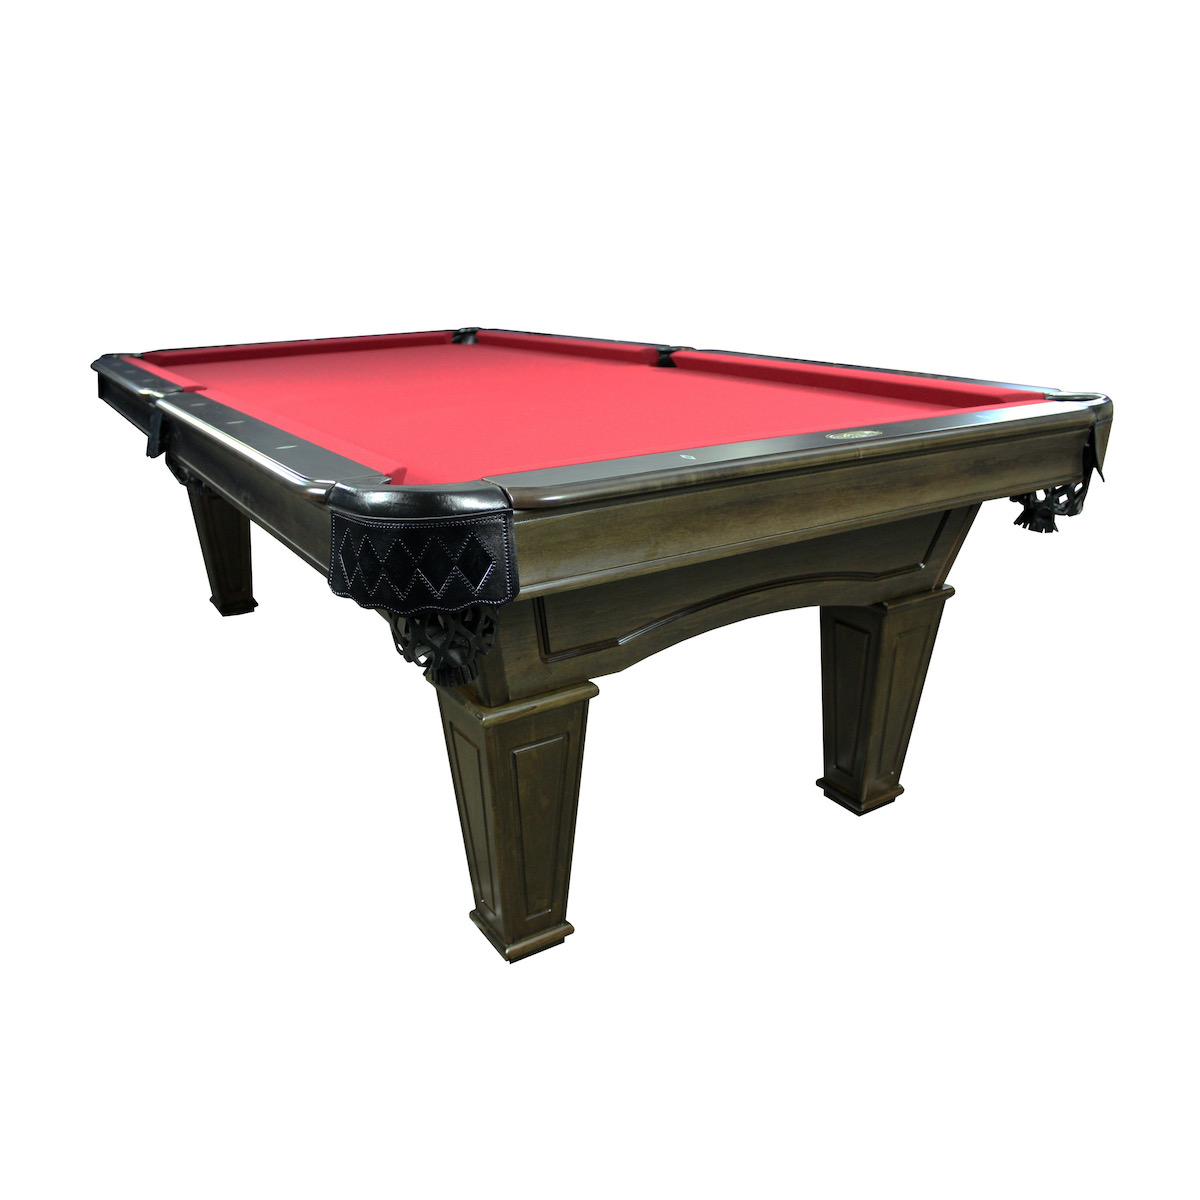 The Washington Billiard Table by Imperial